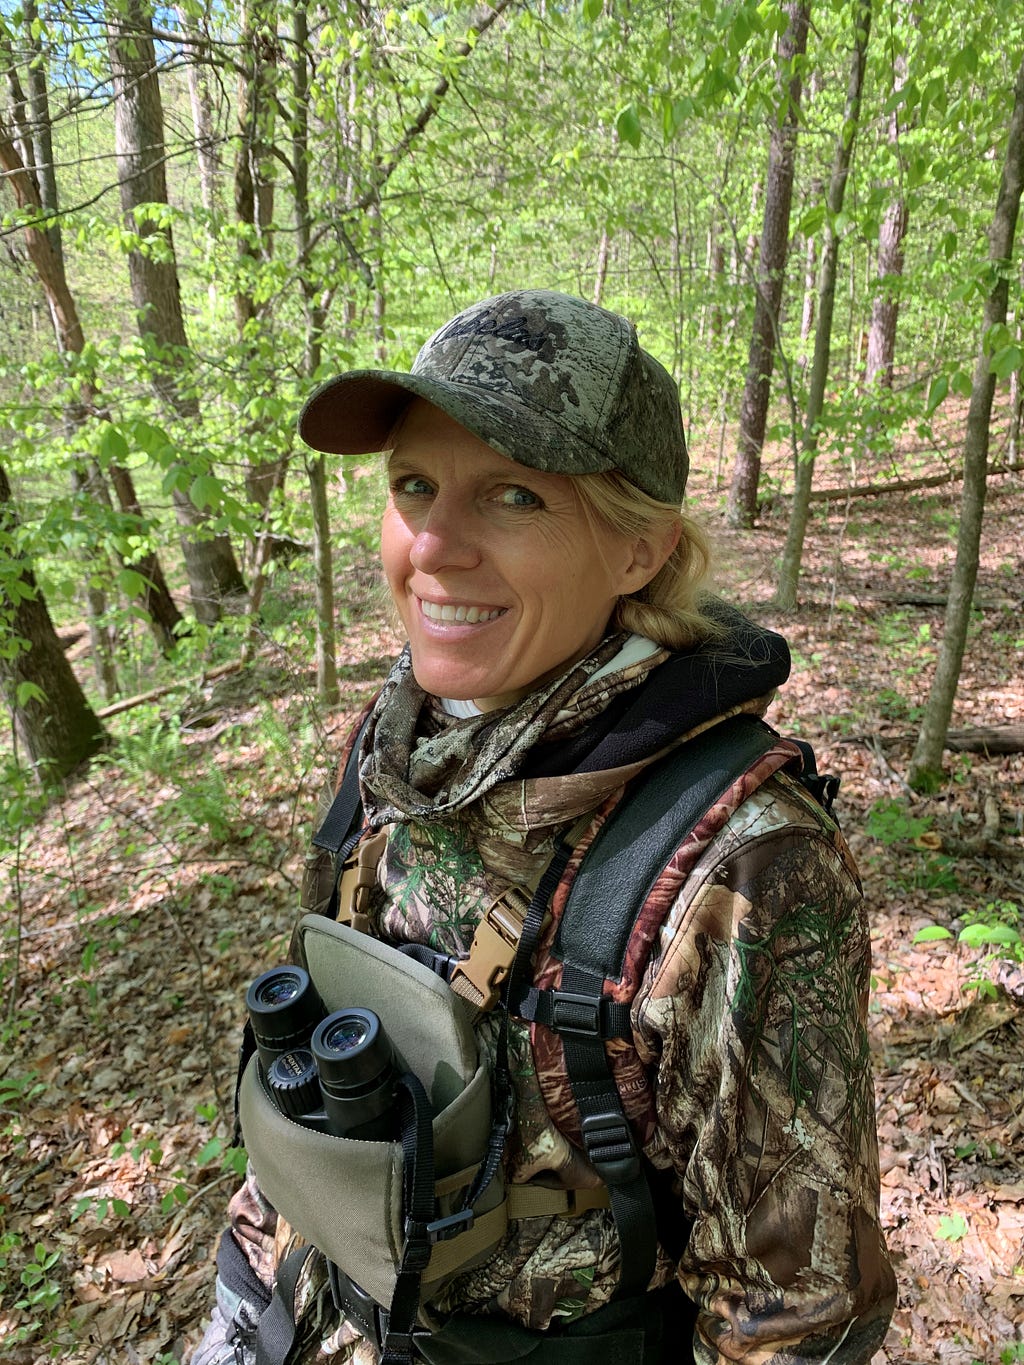 In this profile photo, U.S. Fish and Wildlife Service biologist Joelle Gehring walks in the woods wearing a camouflage jacket and hat and a pair of binoculars in a green case.